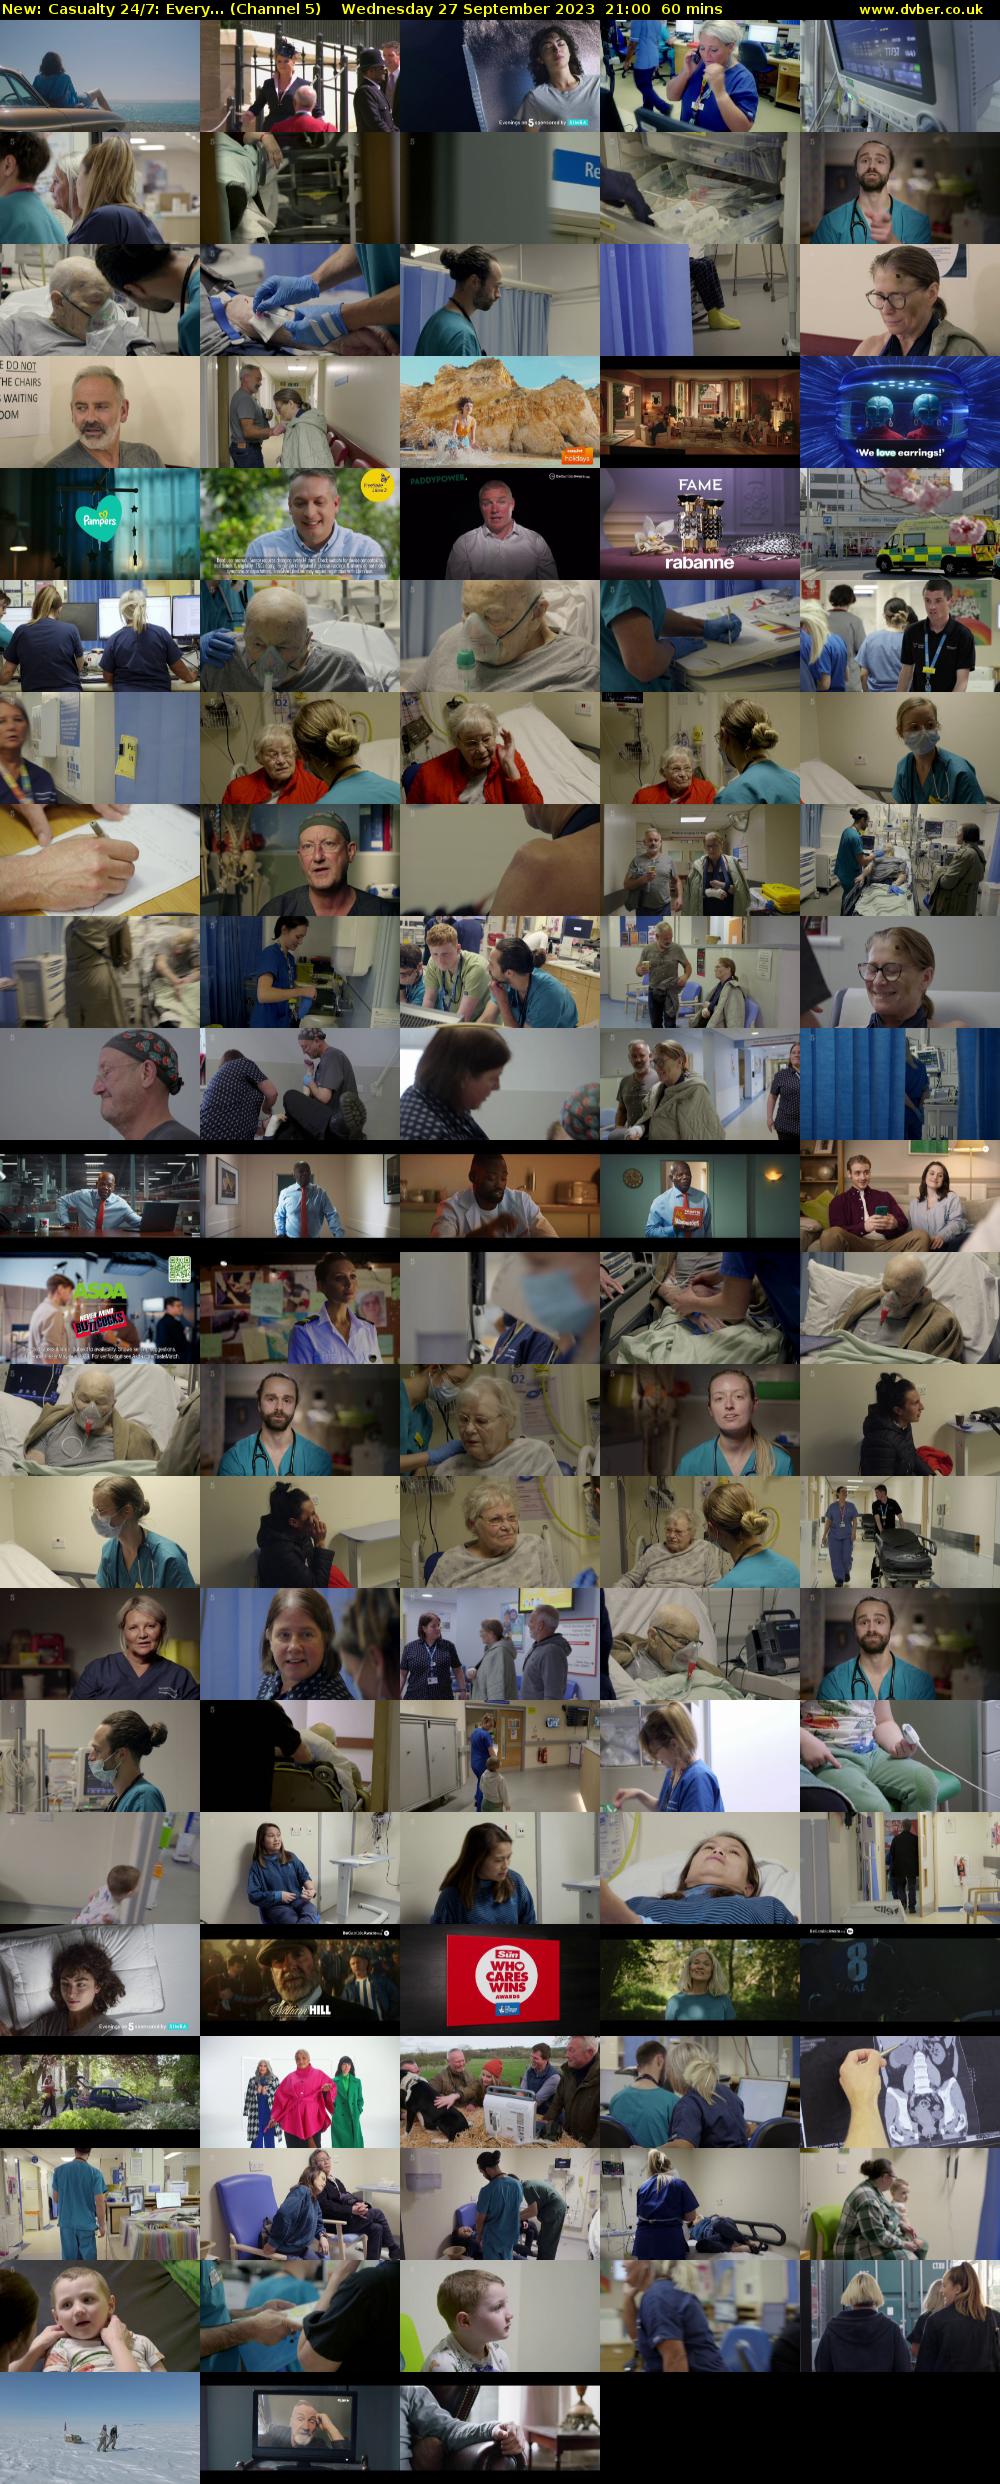 Casualty 24/7: Every... (Channel 5) Wednesday 27 September 2023 21:00 - 22:00